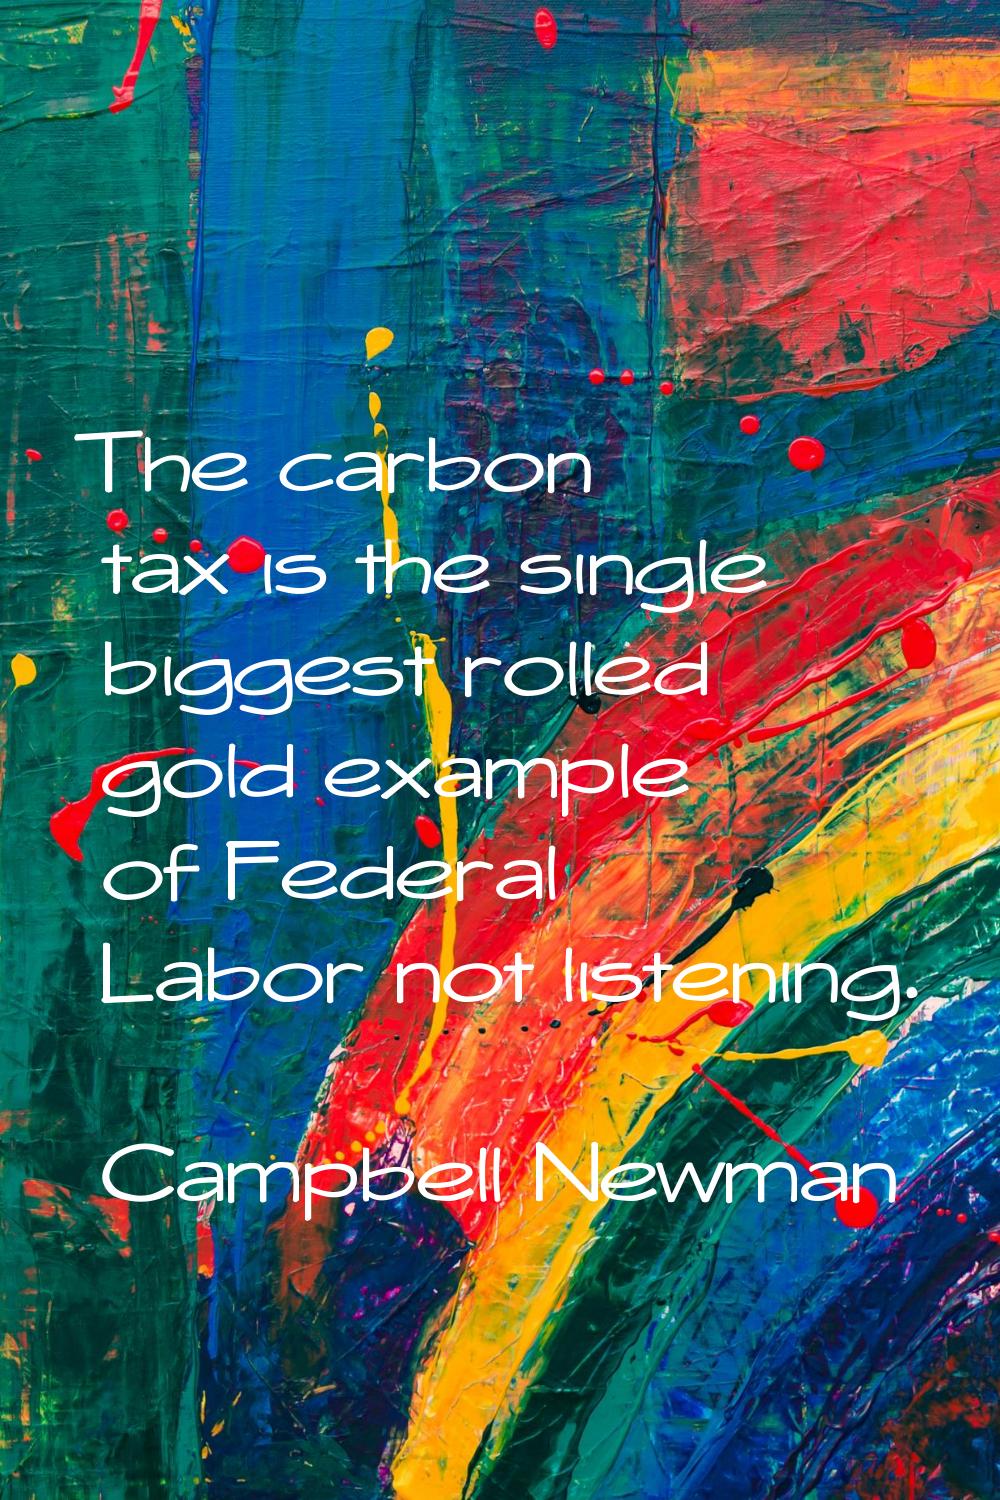 The carbon tax is the single biggest rolled gold example of Federal Labor not listening.